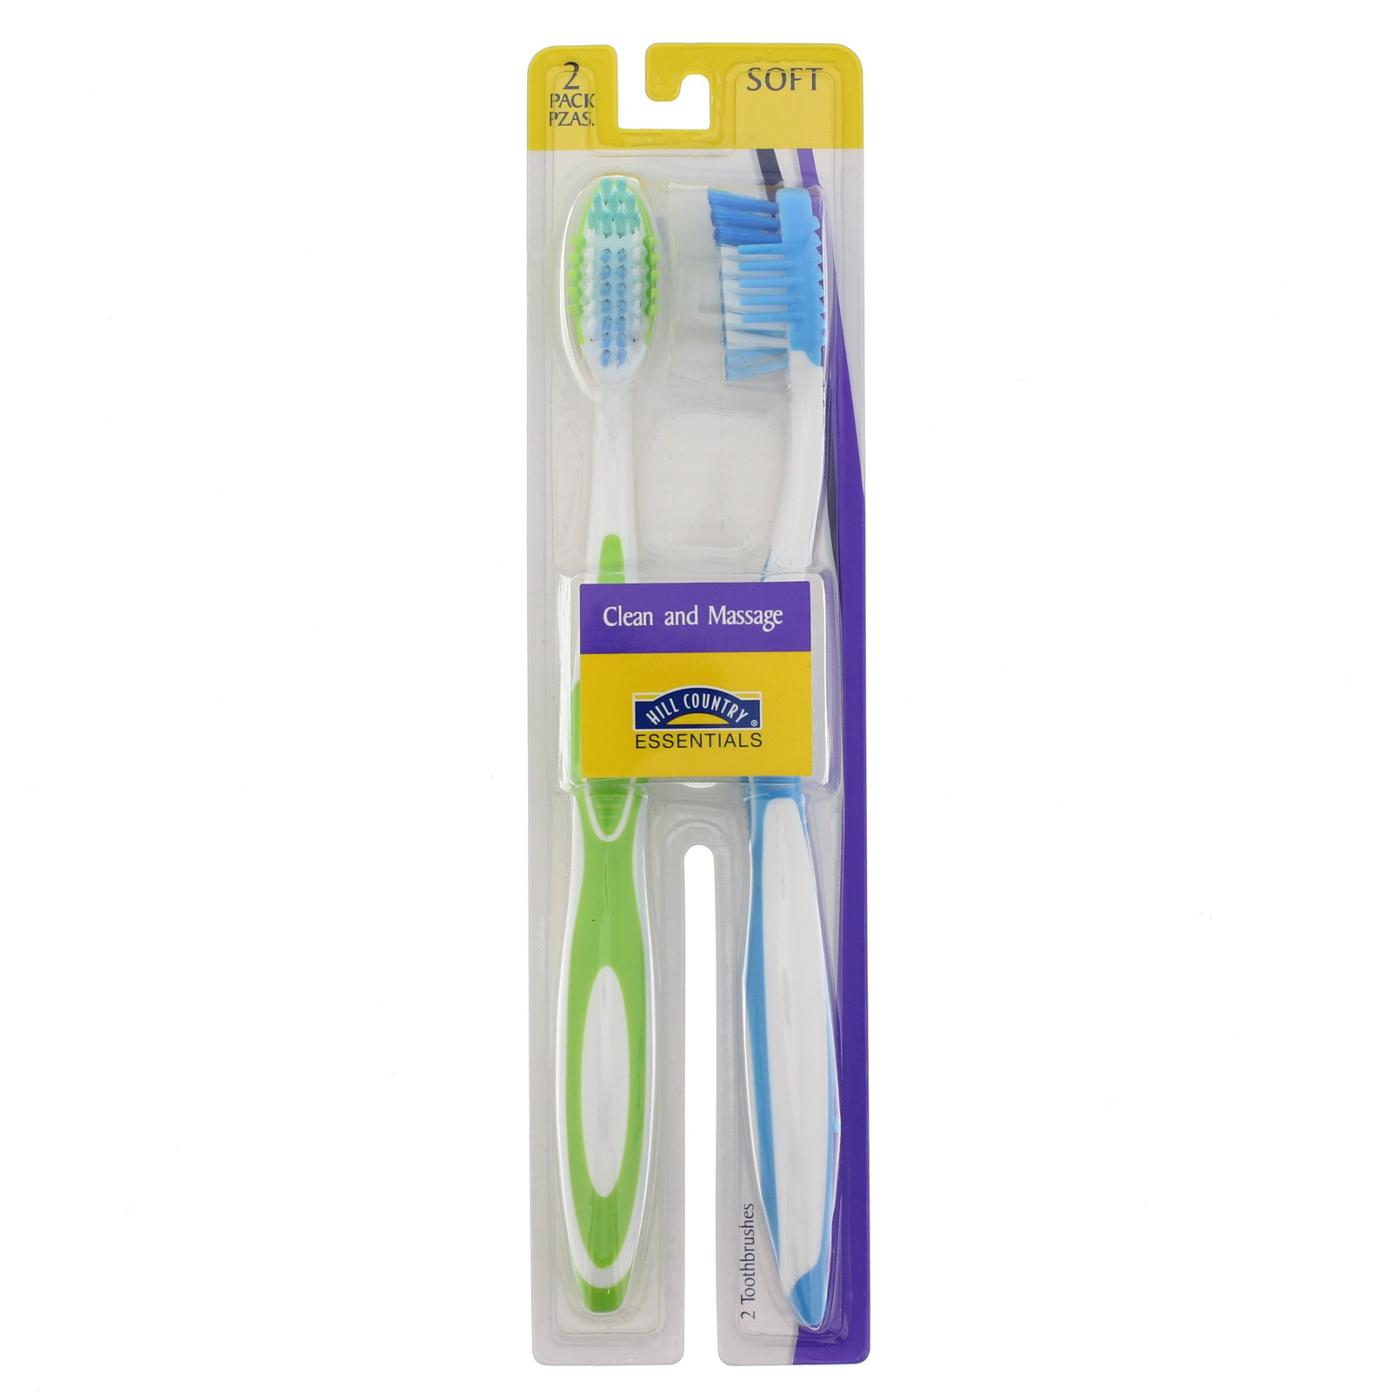 Hill Country Essentials Clean and Massage Soft Toothbrushes - Colors May Vary; image 2 of 2